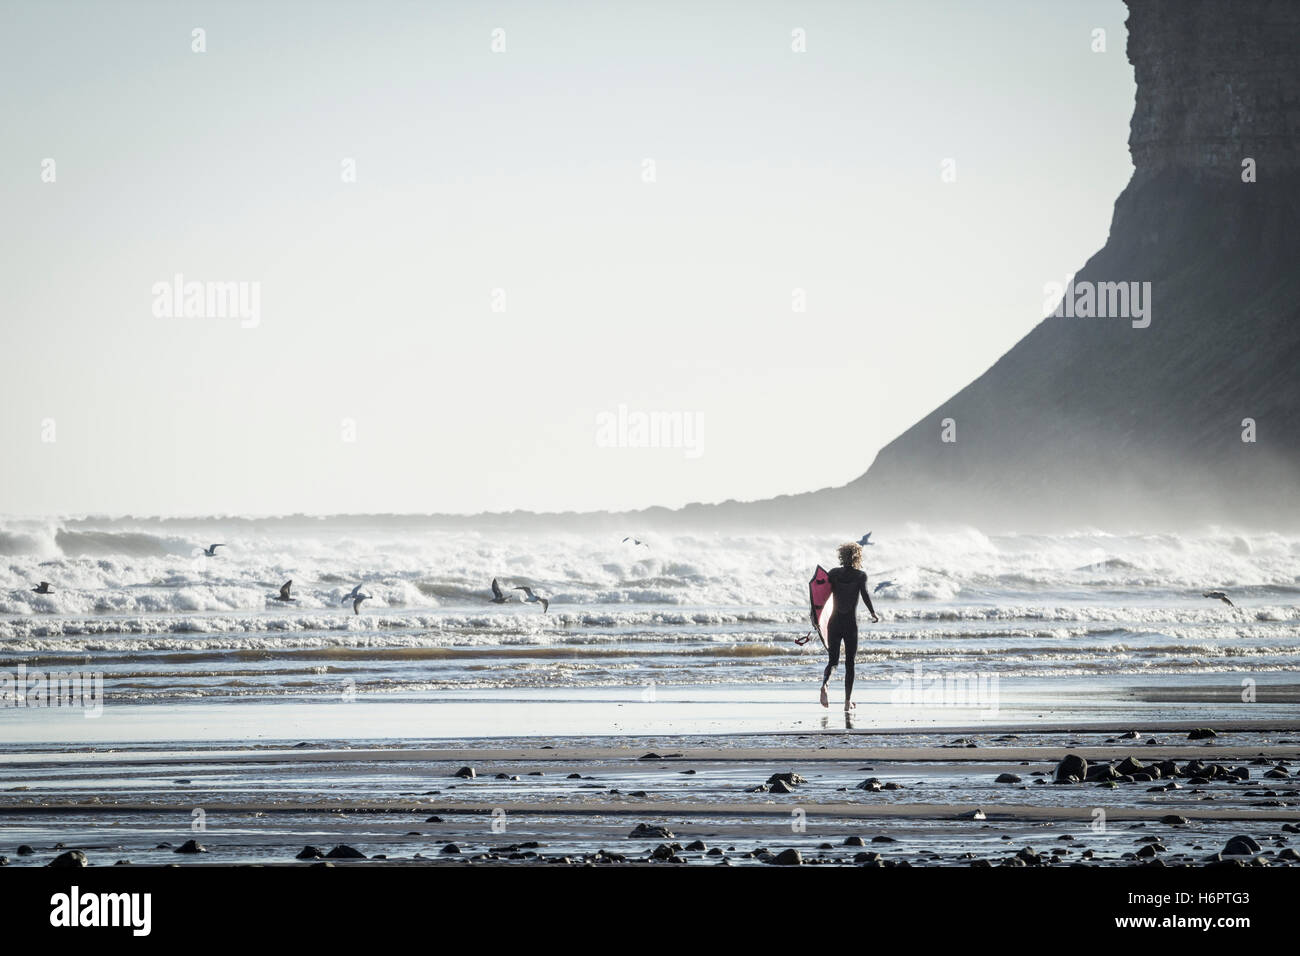 Surfer running on beach with surfboard at Saltburn by the sea, North Yorkshire, England, United Kingdom. Stock Photo